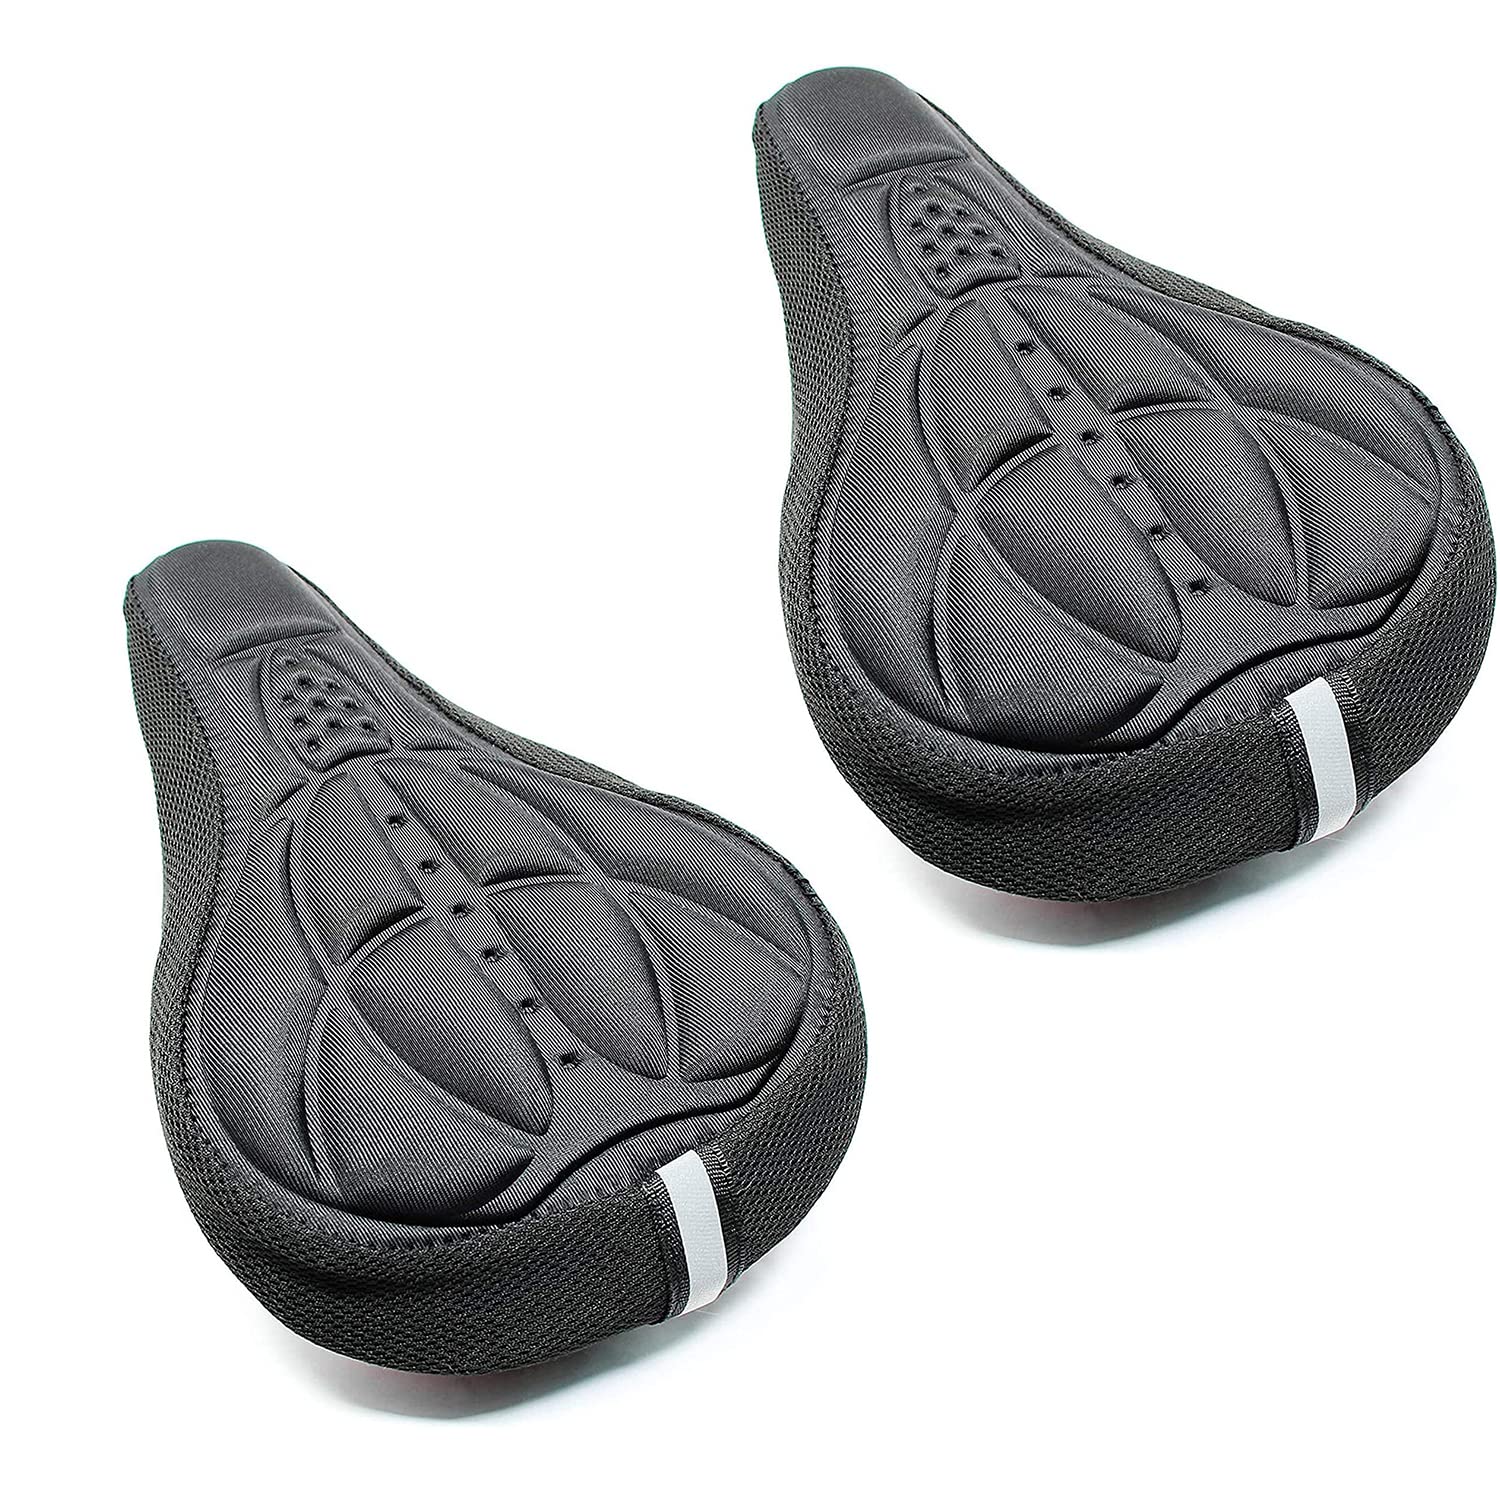 Strauss 3D Sponge Seat Cover, (Black), (Pack of 2)